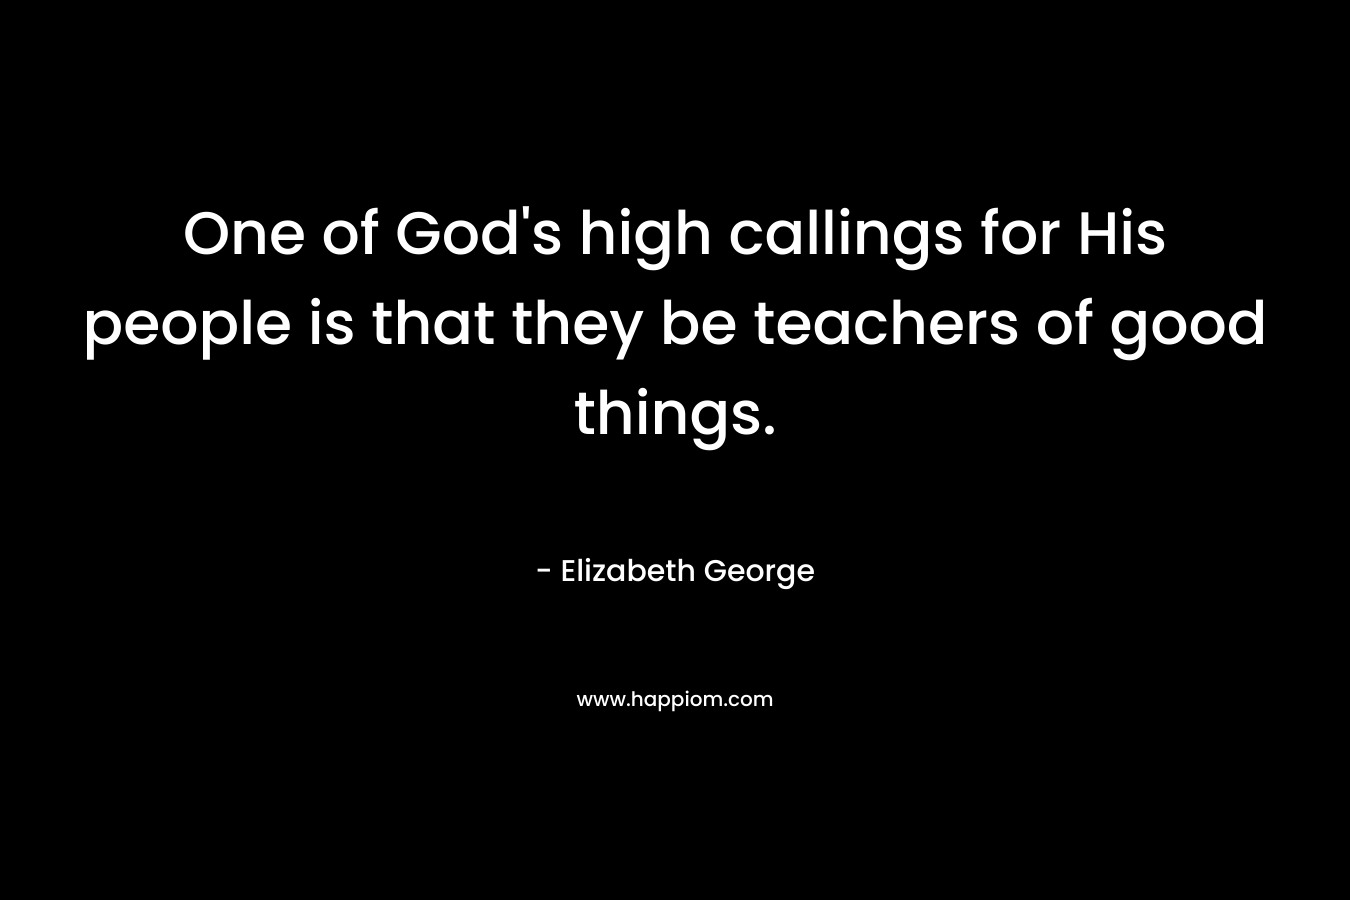 One of God’s high callings for His people is that they be teachers of good things. – Elizabeth George